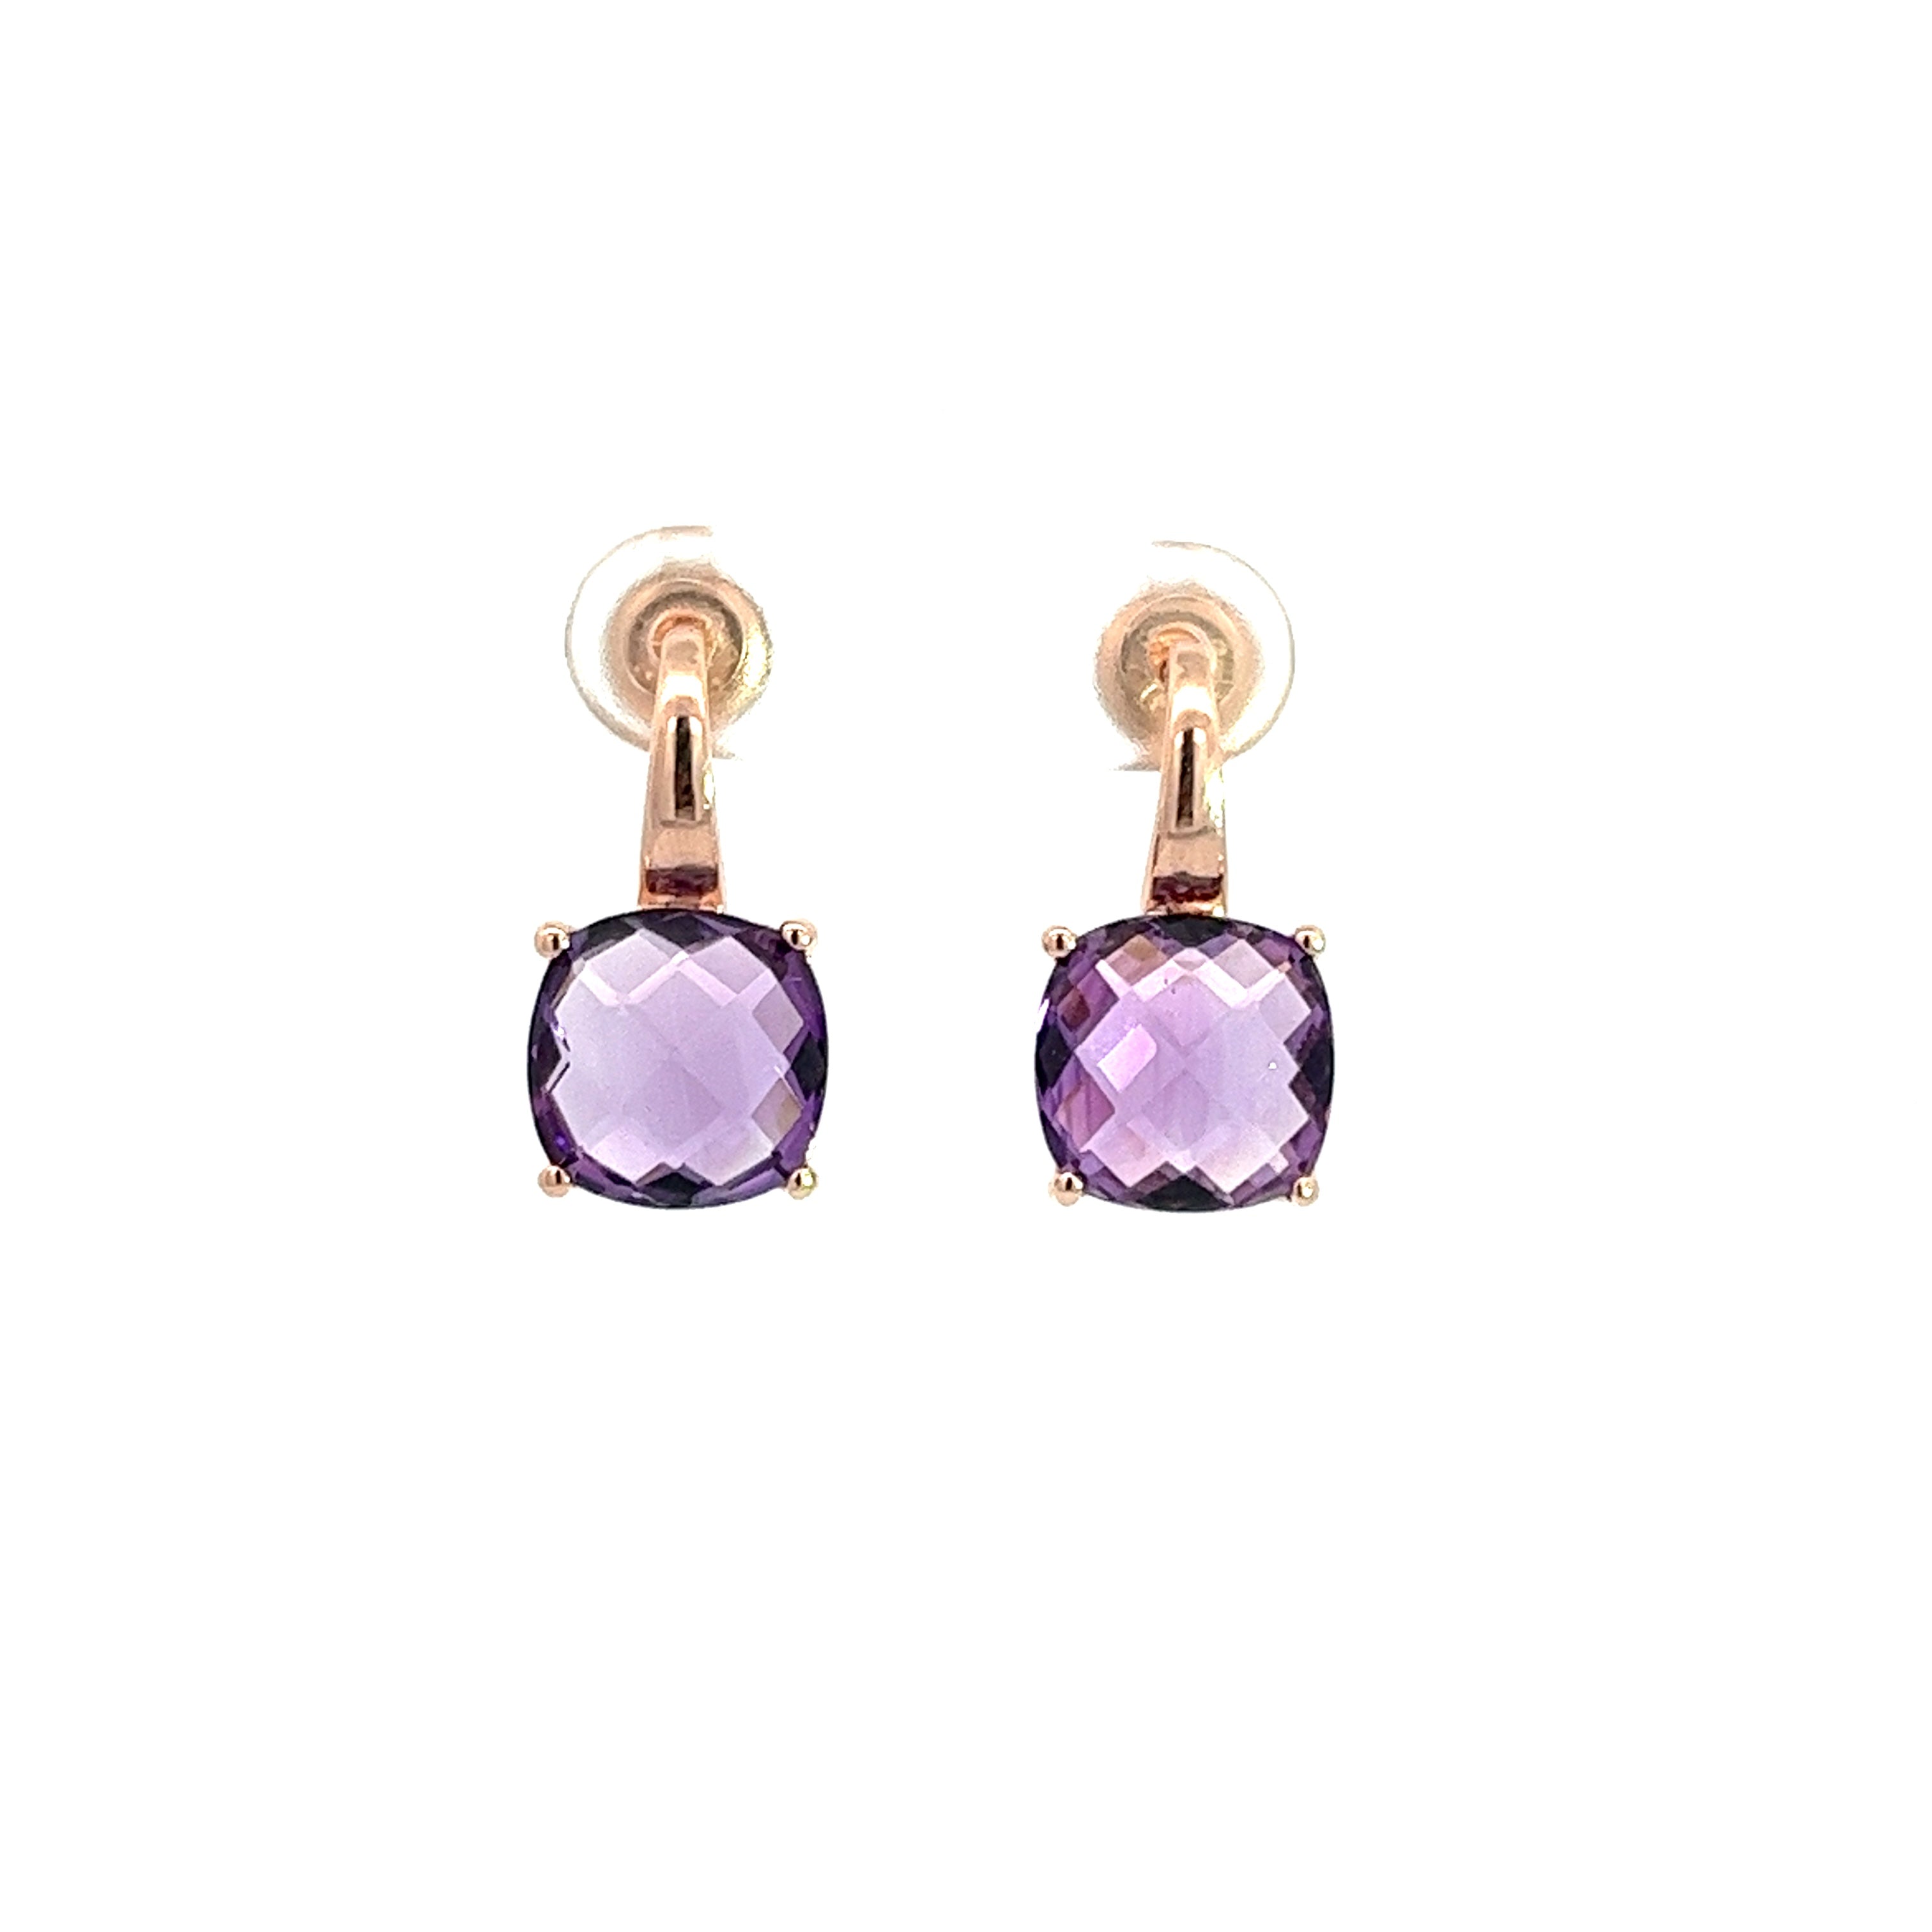 AMETHYST CUSHION EARRINGS SET IN 925 SILVER ROSE GOLD PLATED